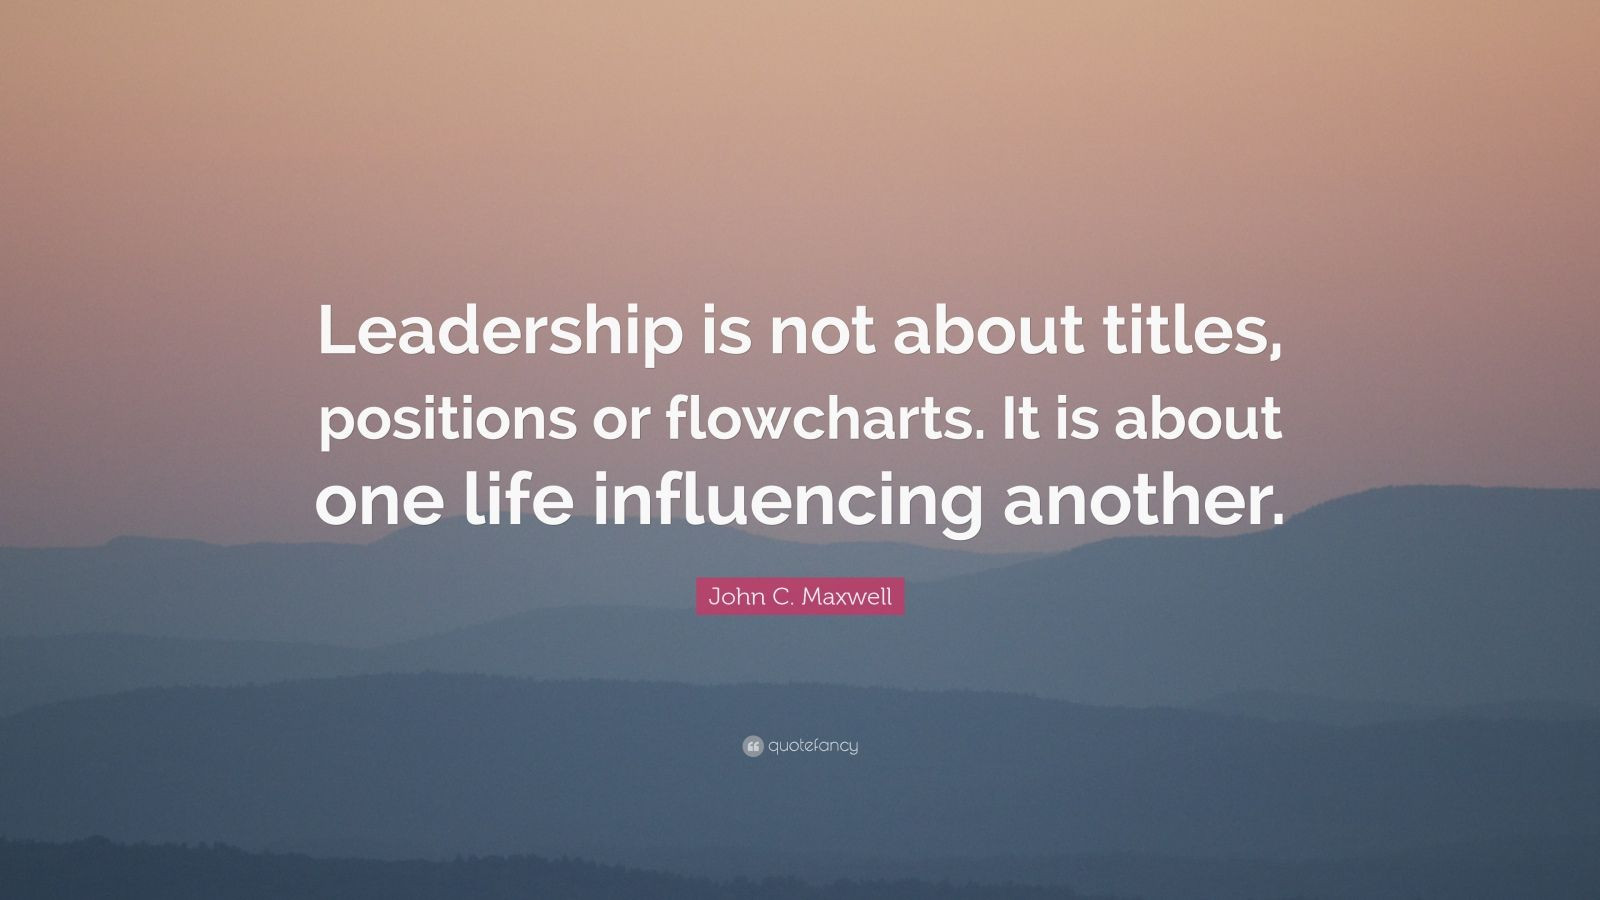 John C Maxwell Leadership Quotes
 John C Maxwell Quote “Leadership is not about titles